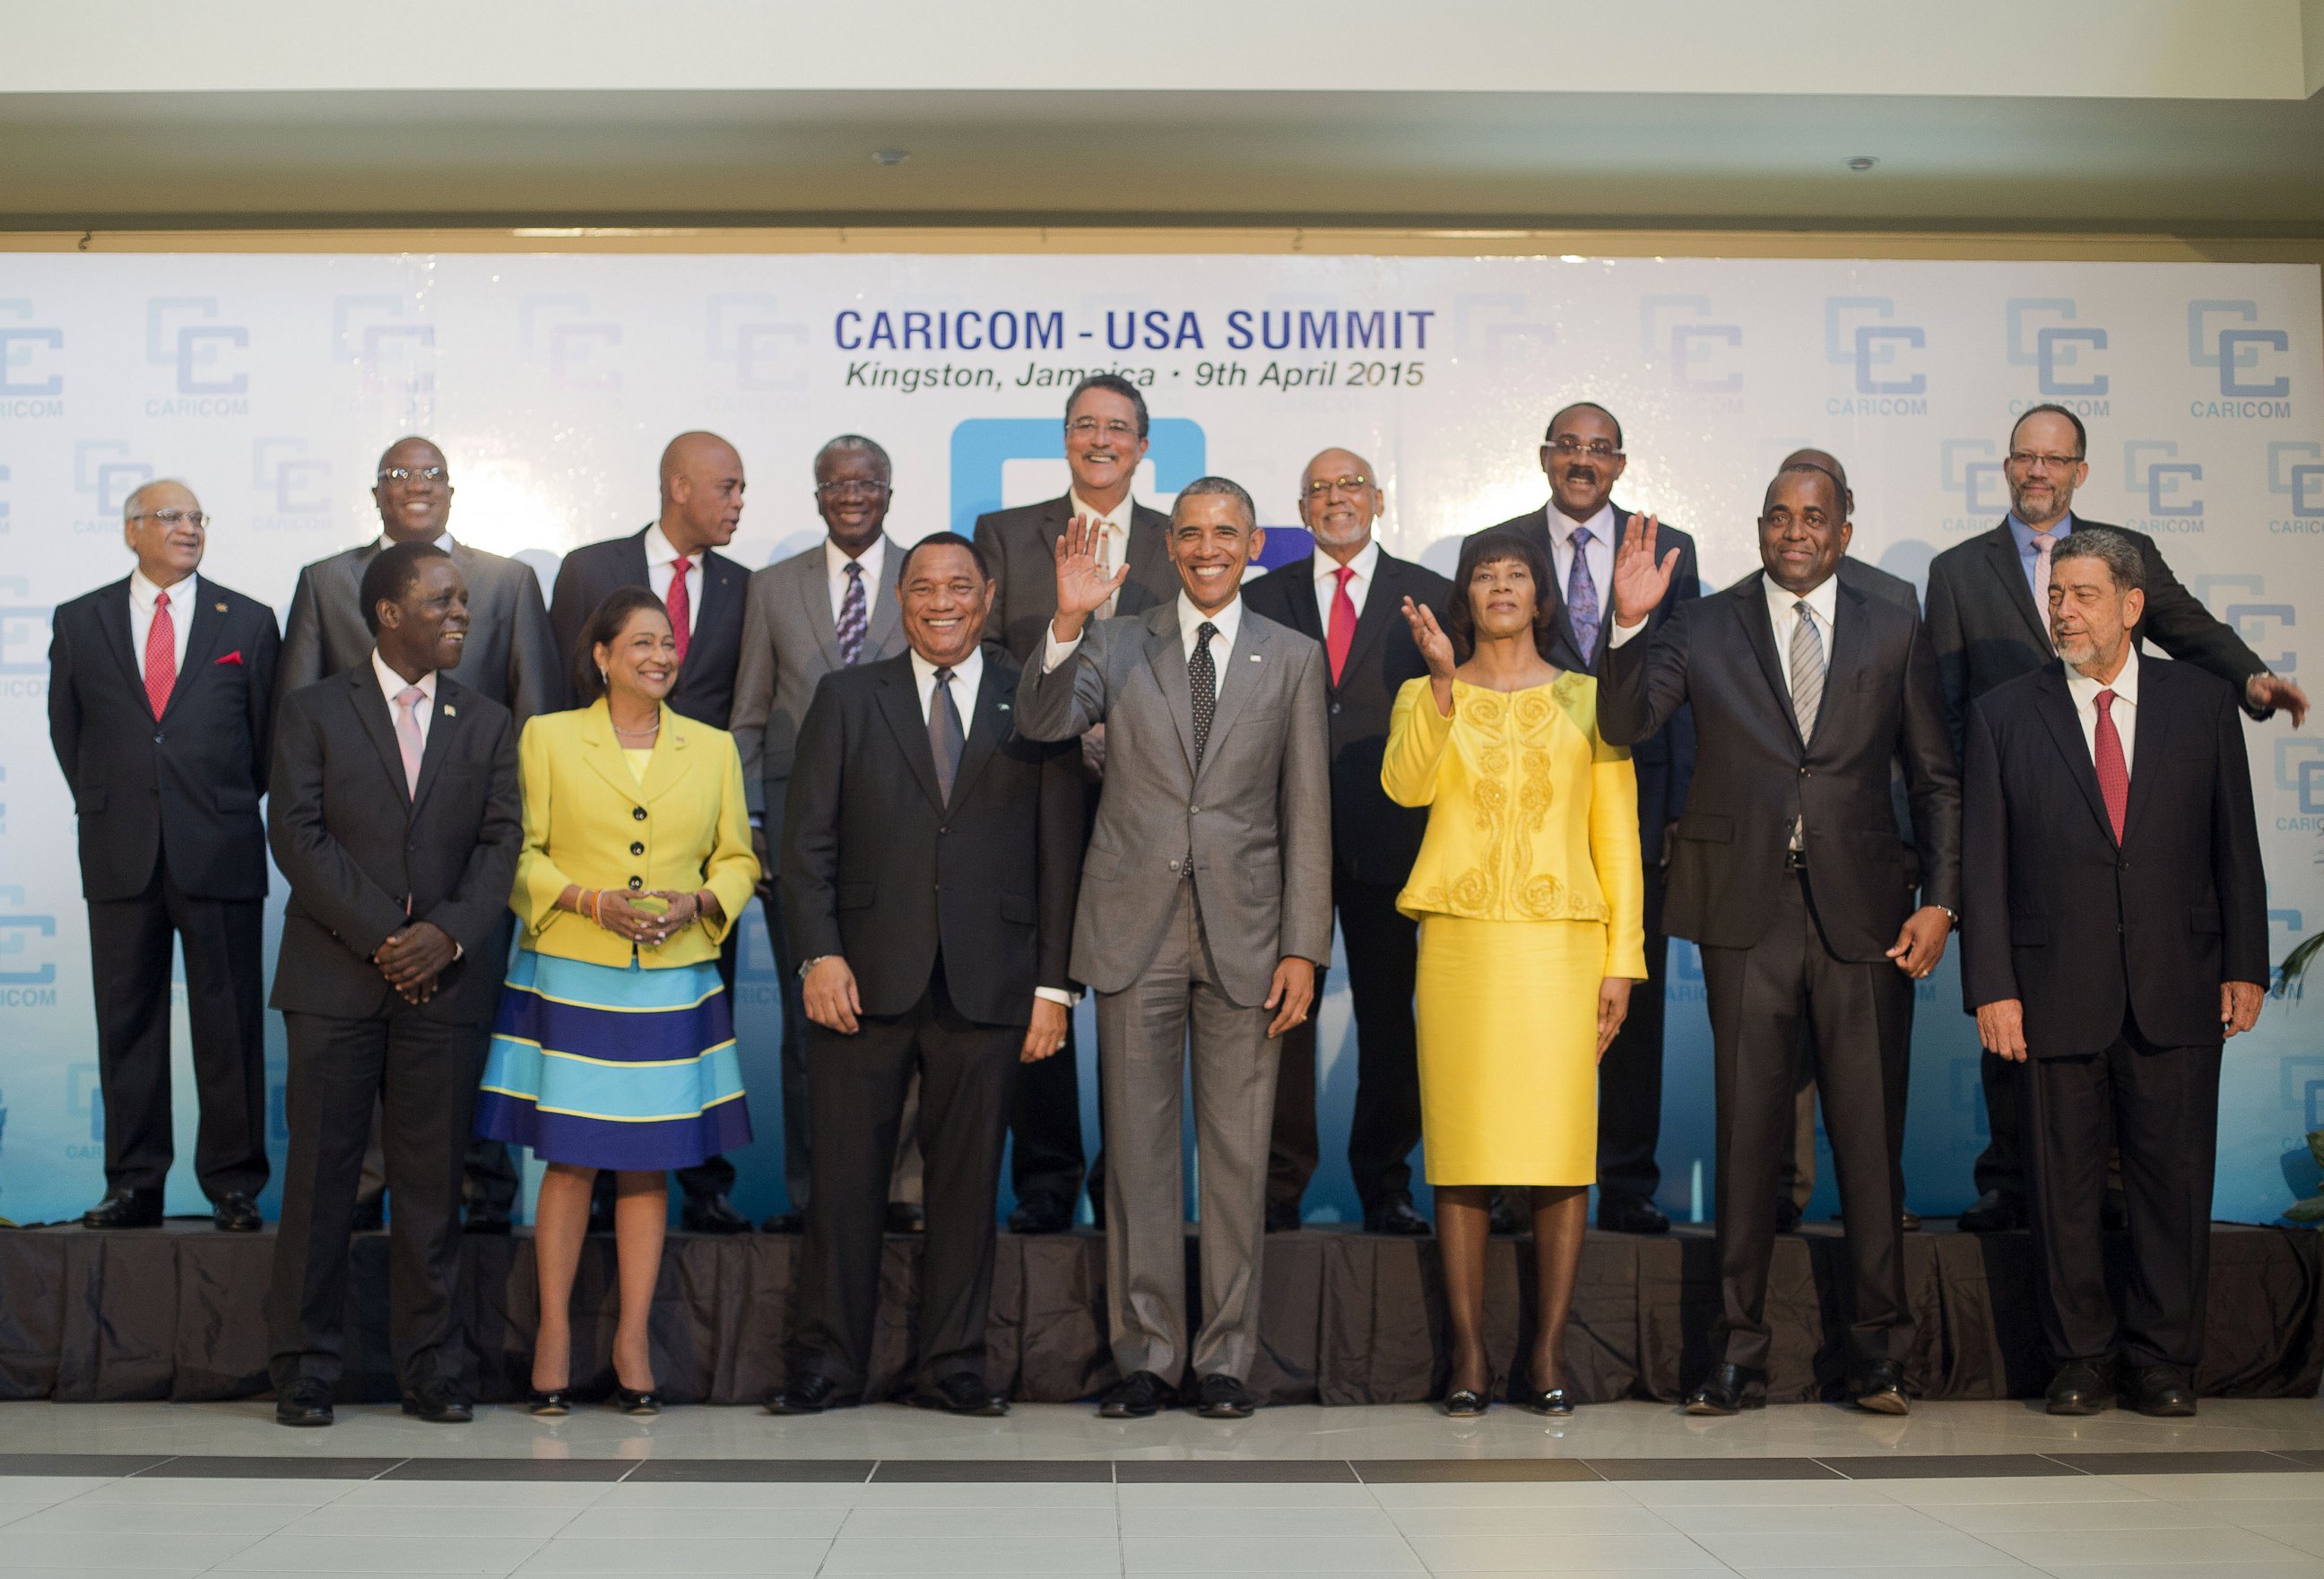 PHOTO: President Barack Obama, center, and Jamaican Prime Minister Portia Simpson-Miller, third from right, are joined by Caribbean Community (CARICOM) leaders for a group photo during the start of their summit, April 9, 2015, in Kingston, Jamaica.